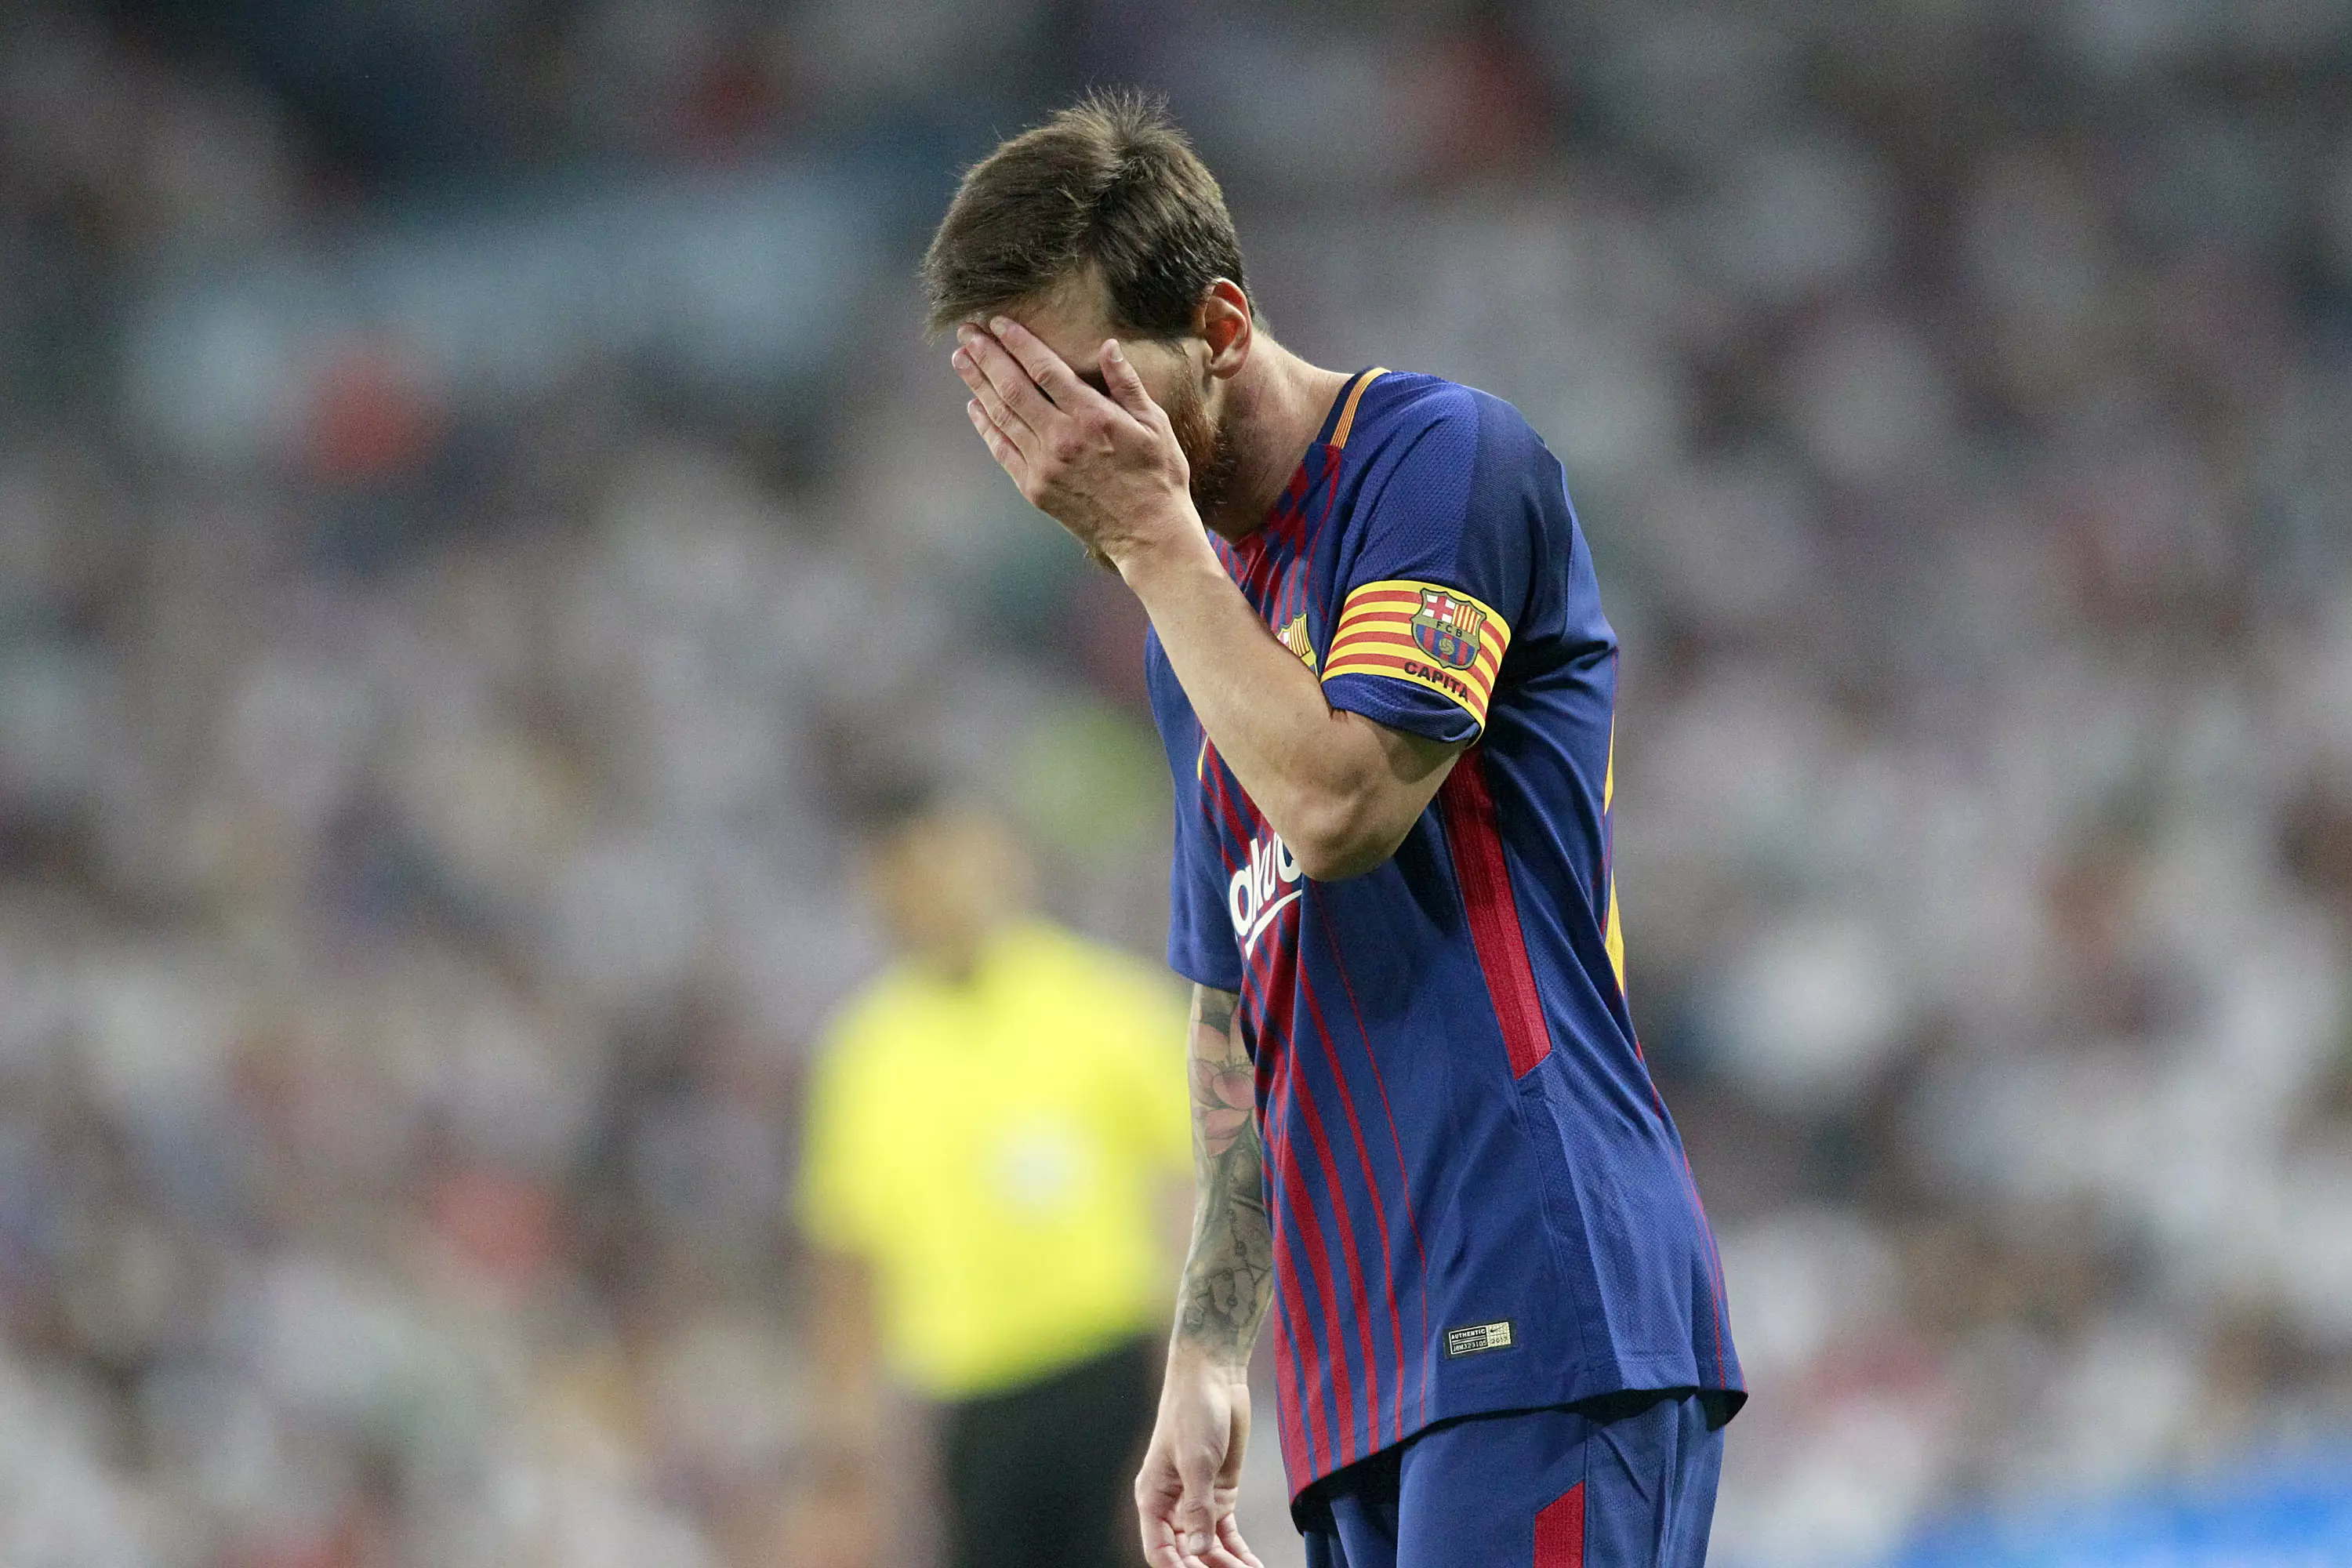 Messi cuts a dejected figure. Image: PA